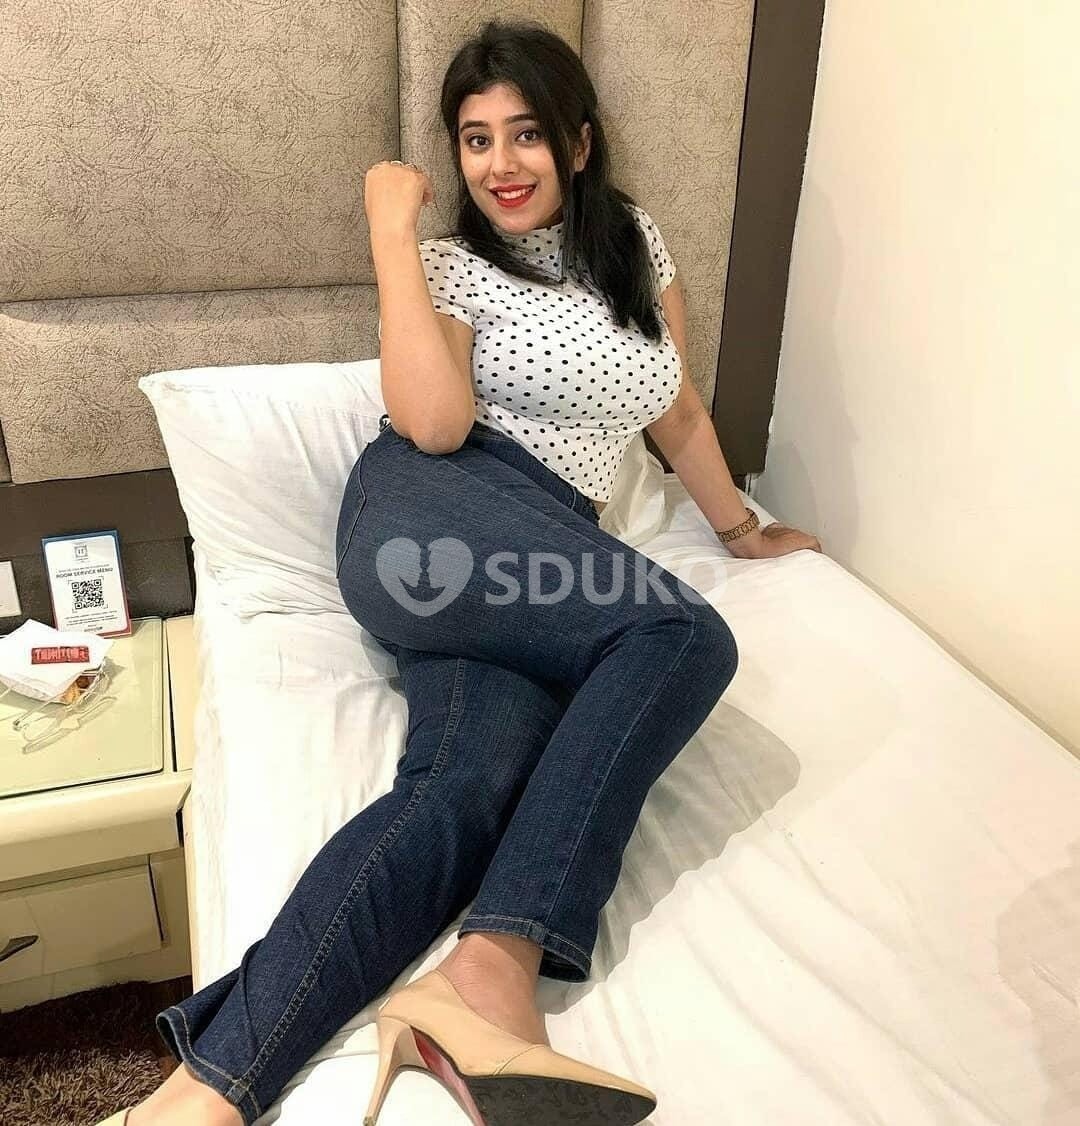 ❣️AMEERPET MY SELF JAYA BEST VIP INDEPENDENT HOT COLLAGE GIRL AVAILABLE